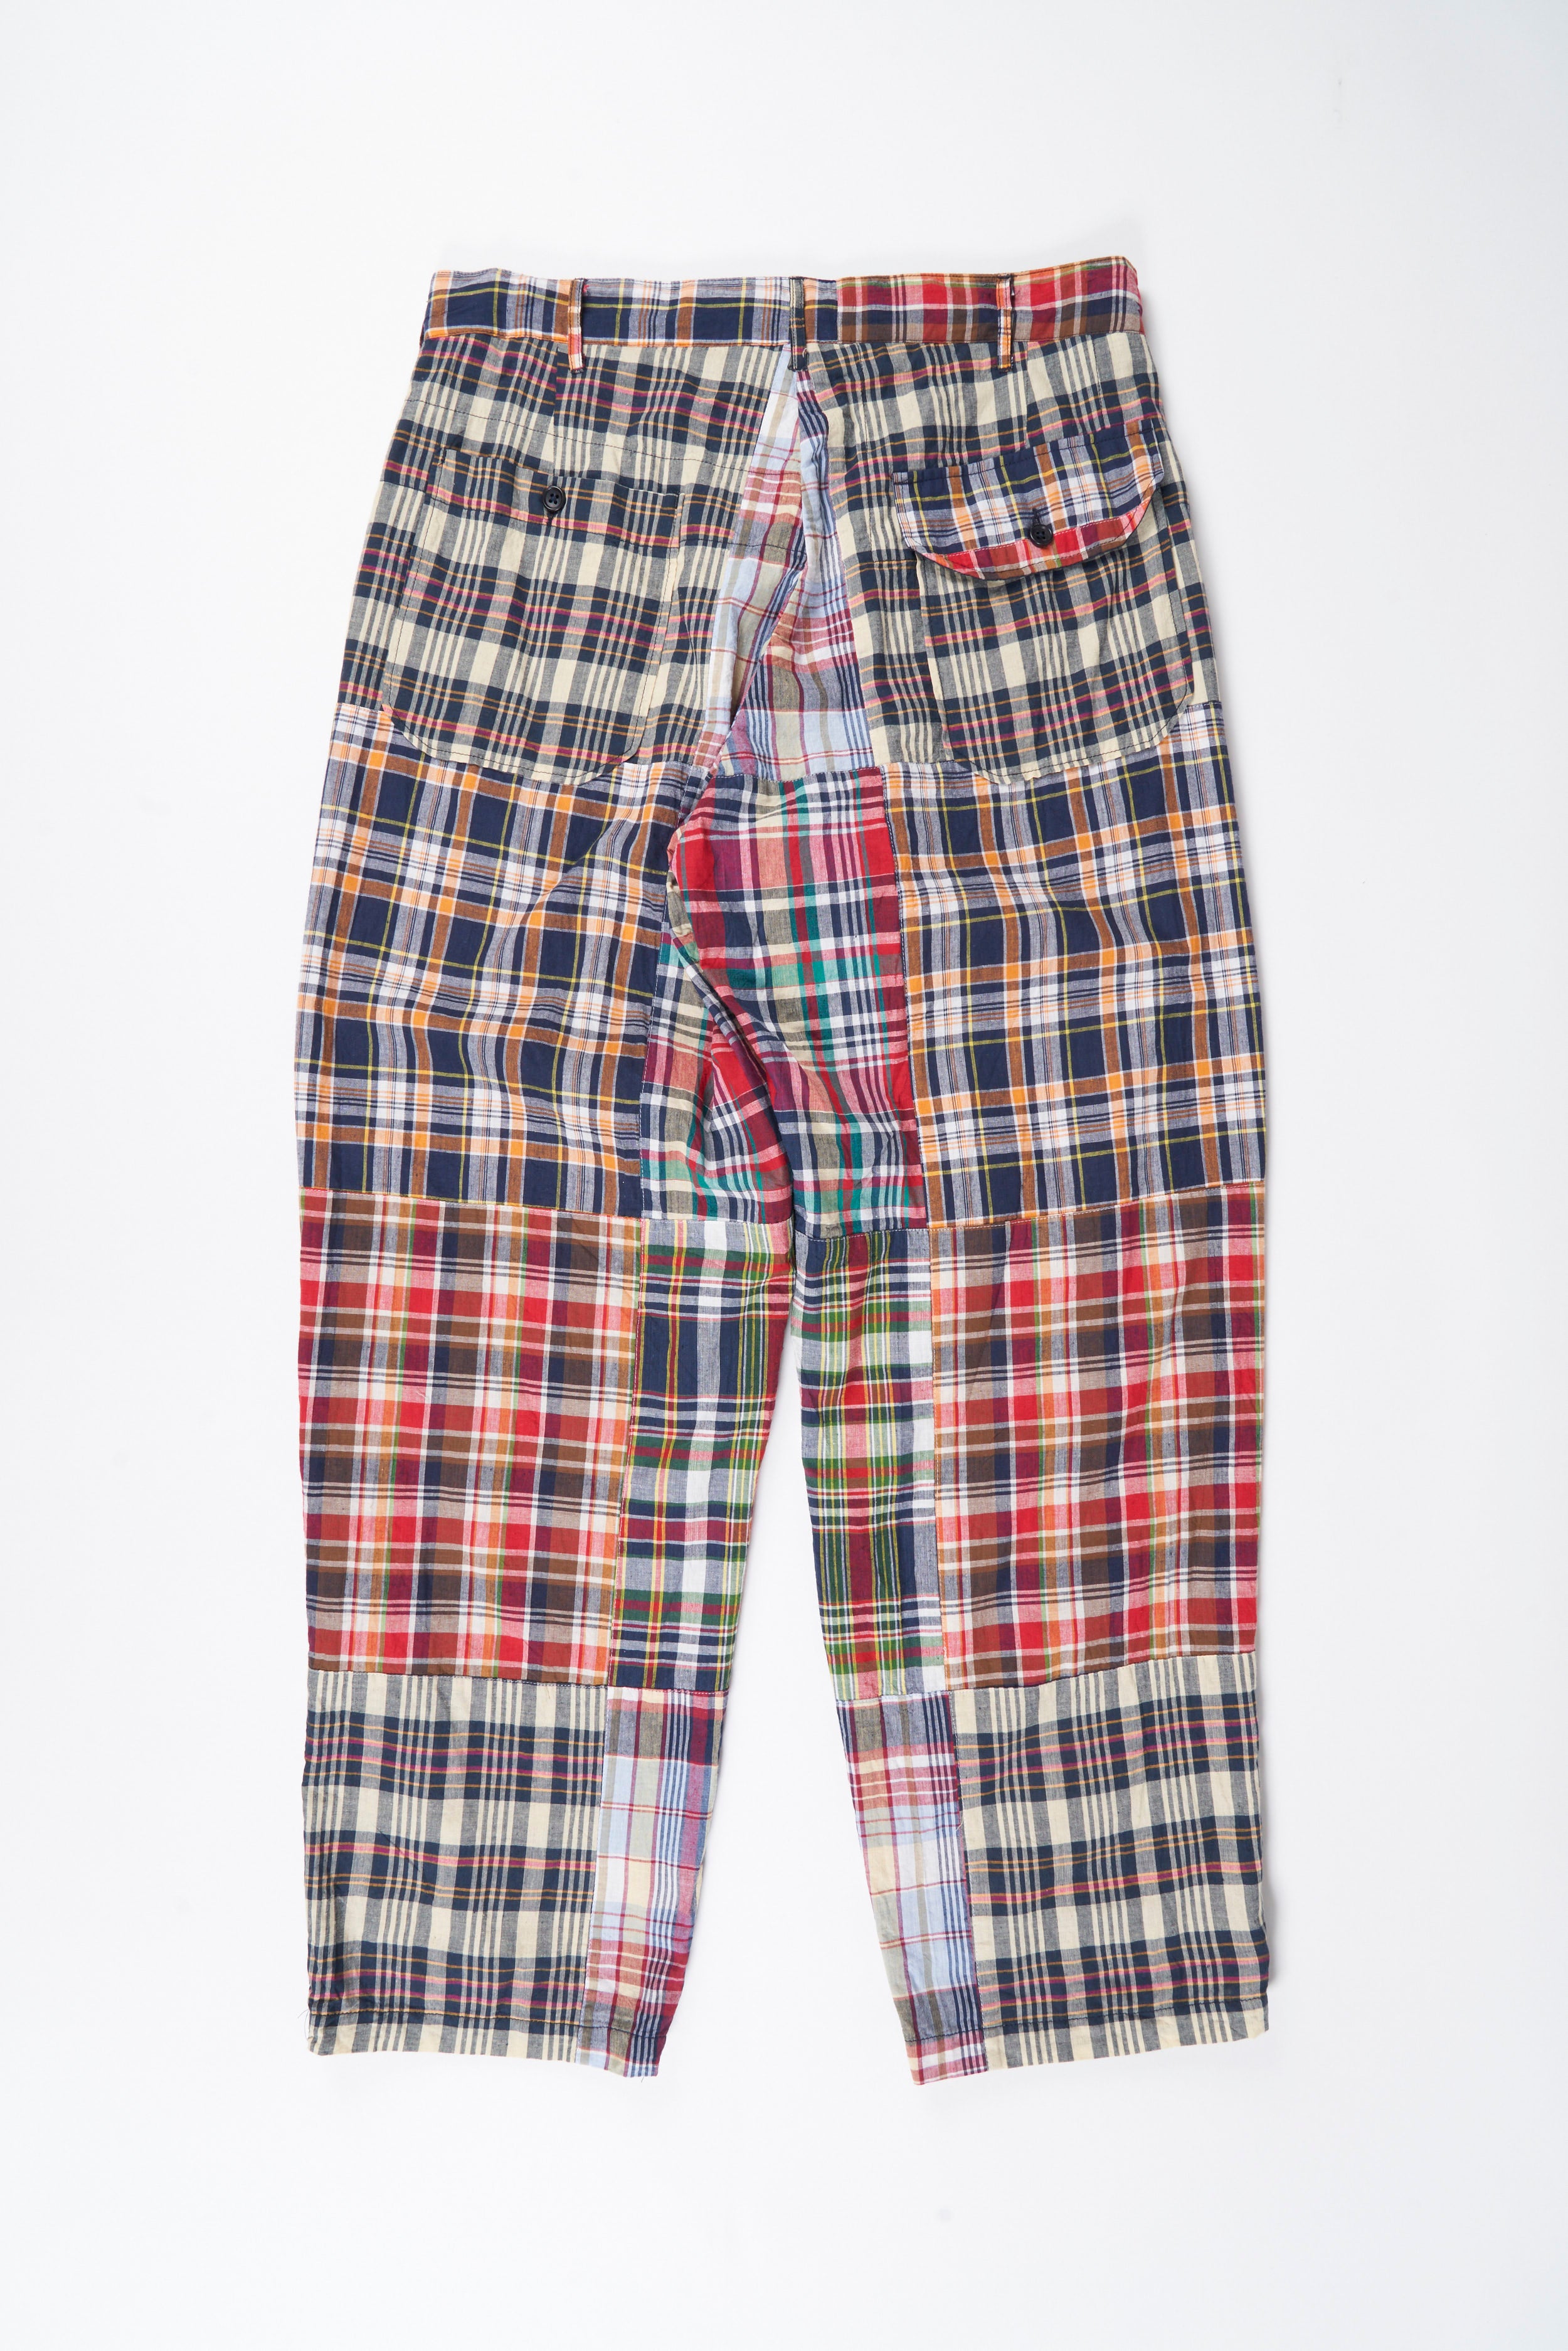 Carlyle Pant - Navy Square Patchwork Madras